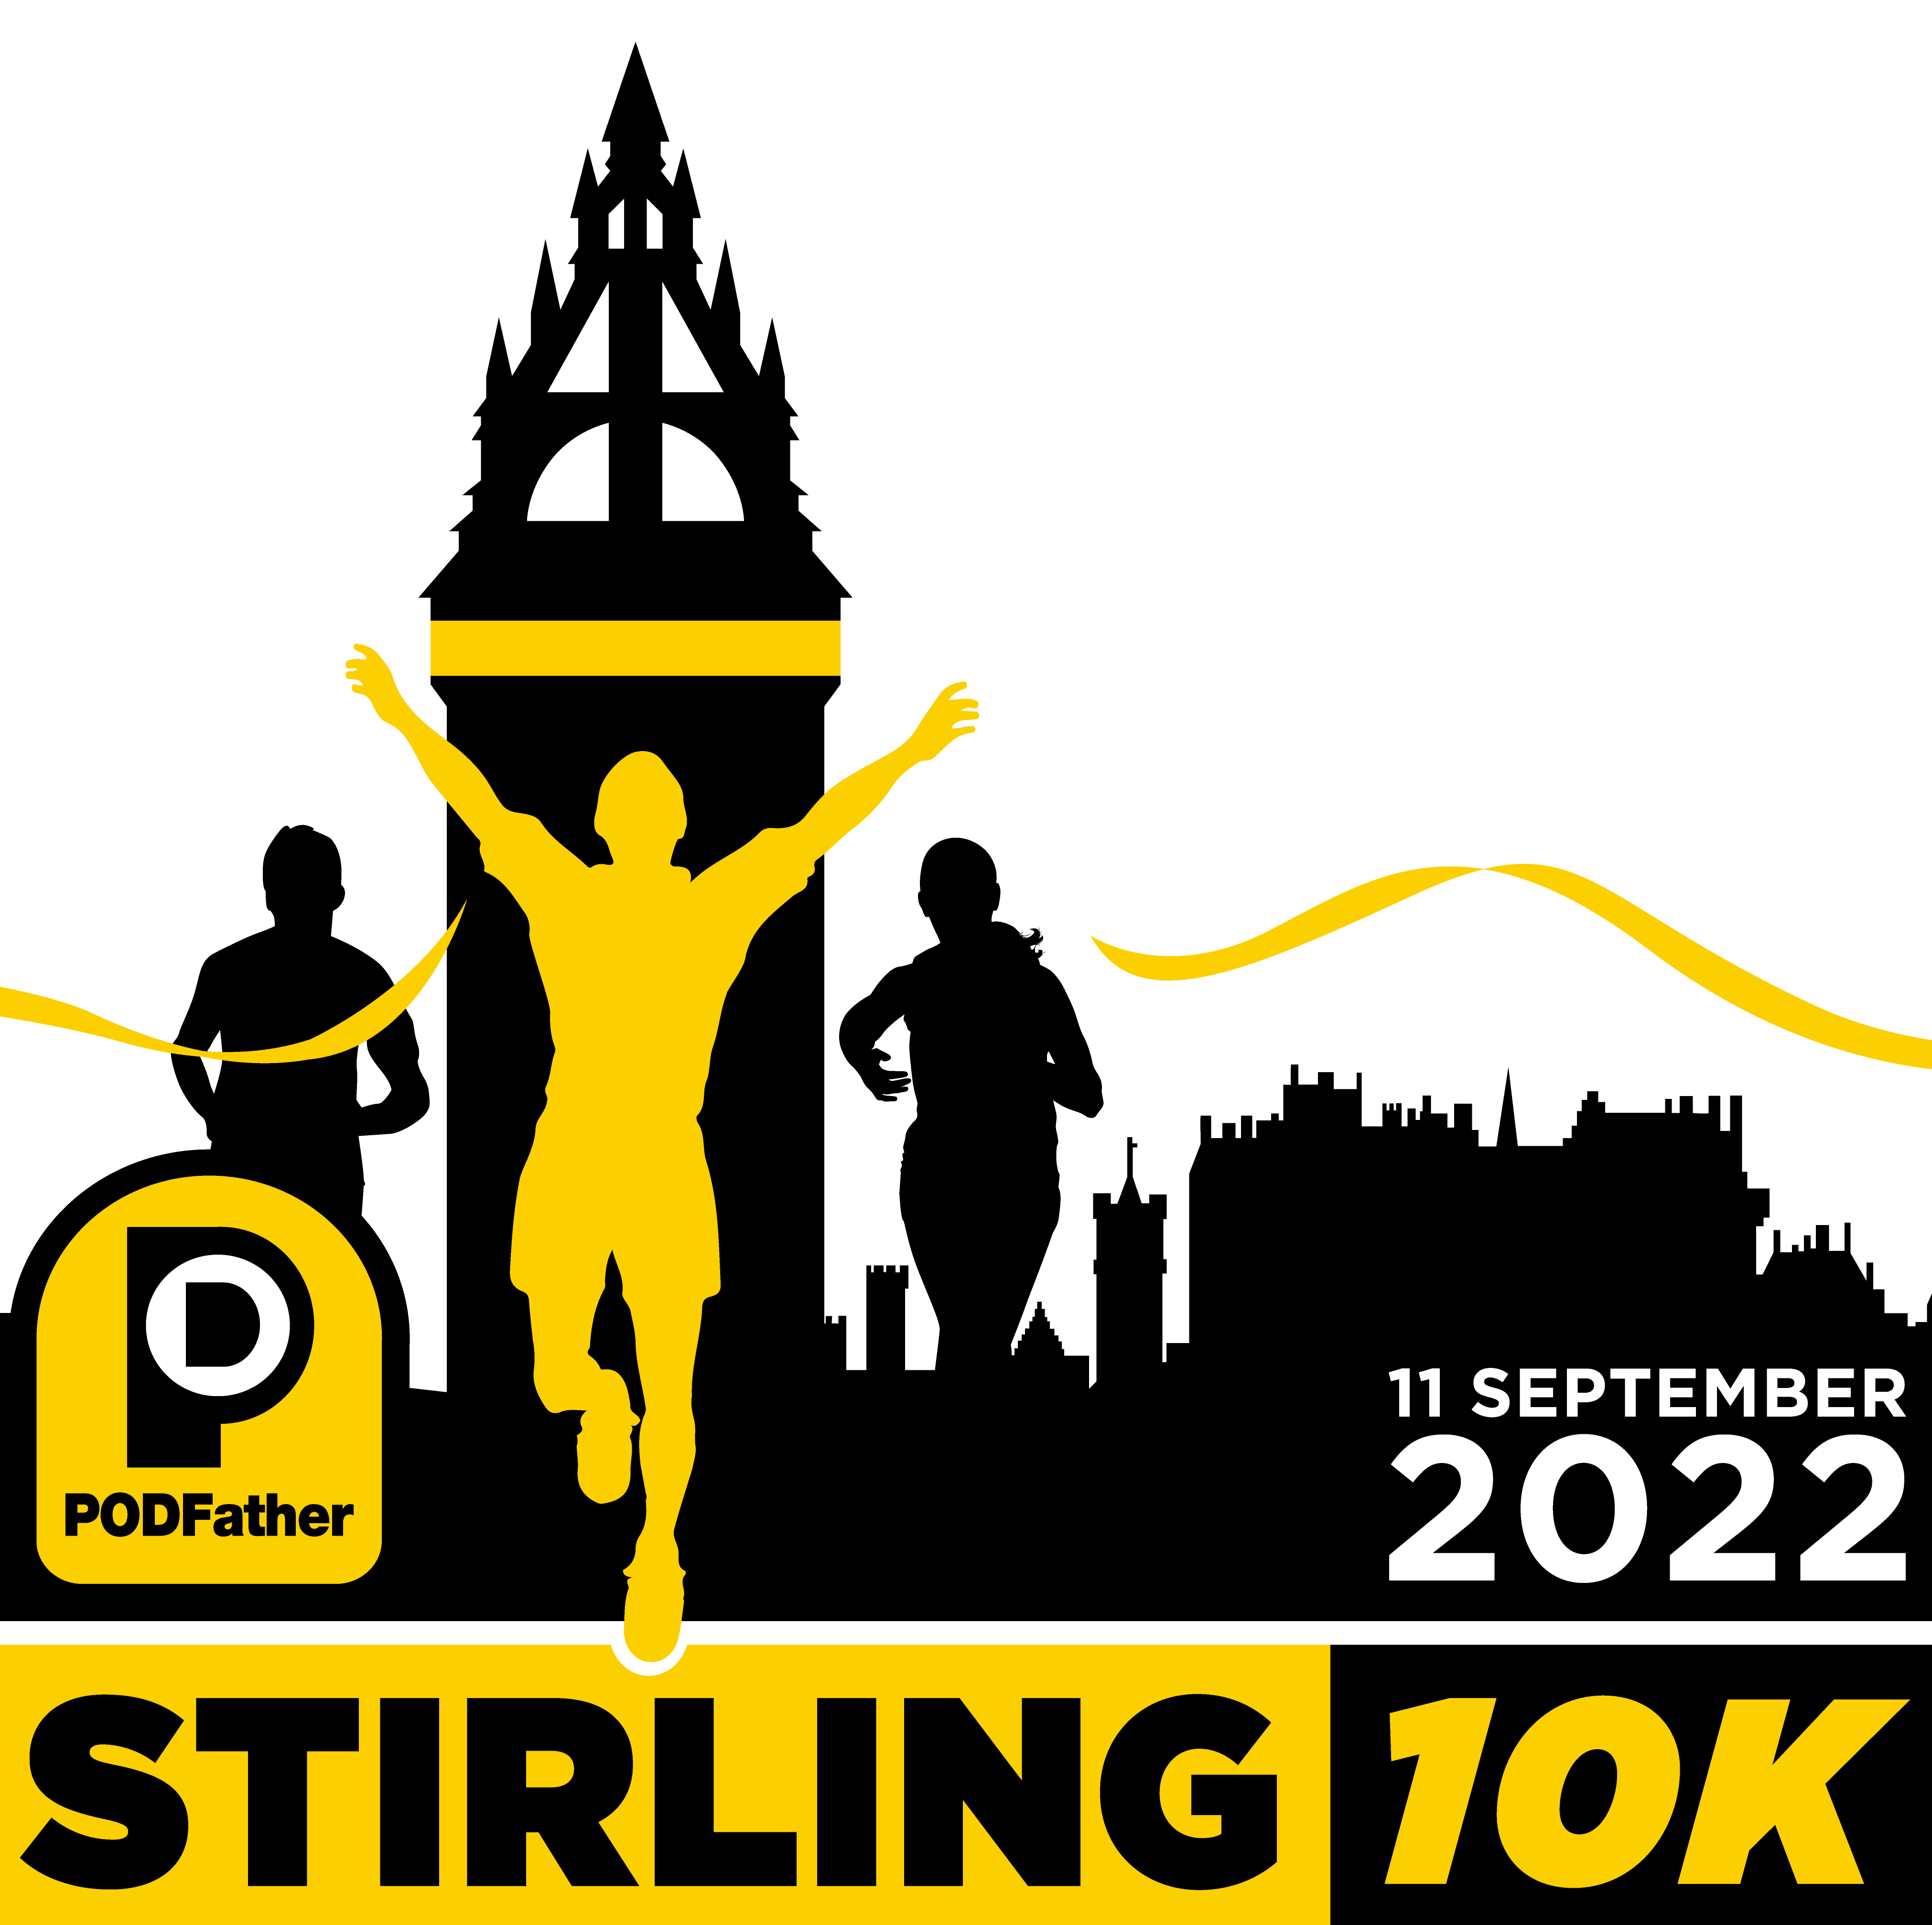 PODFather sets the pace with Stirling 10k sponsorship